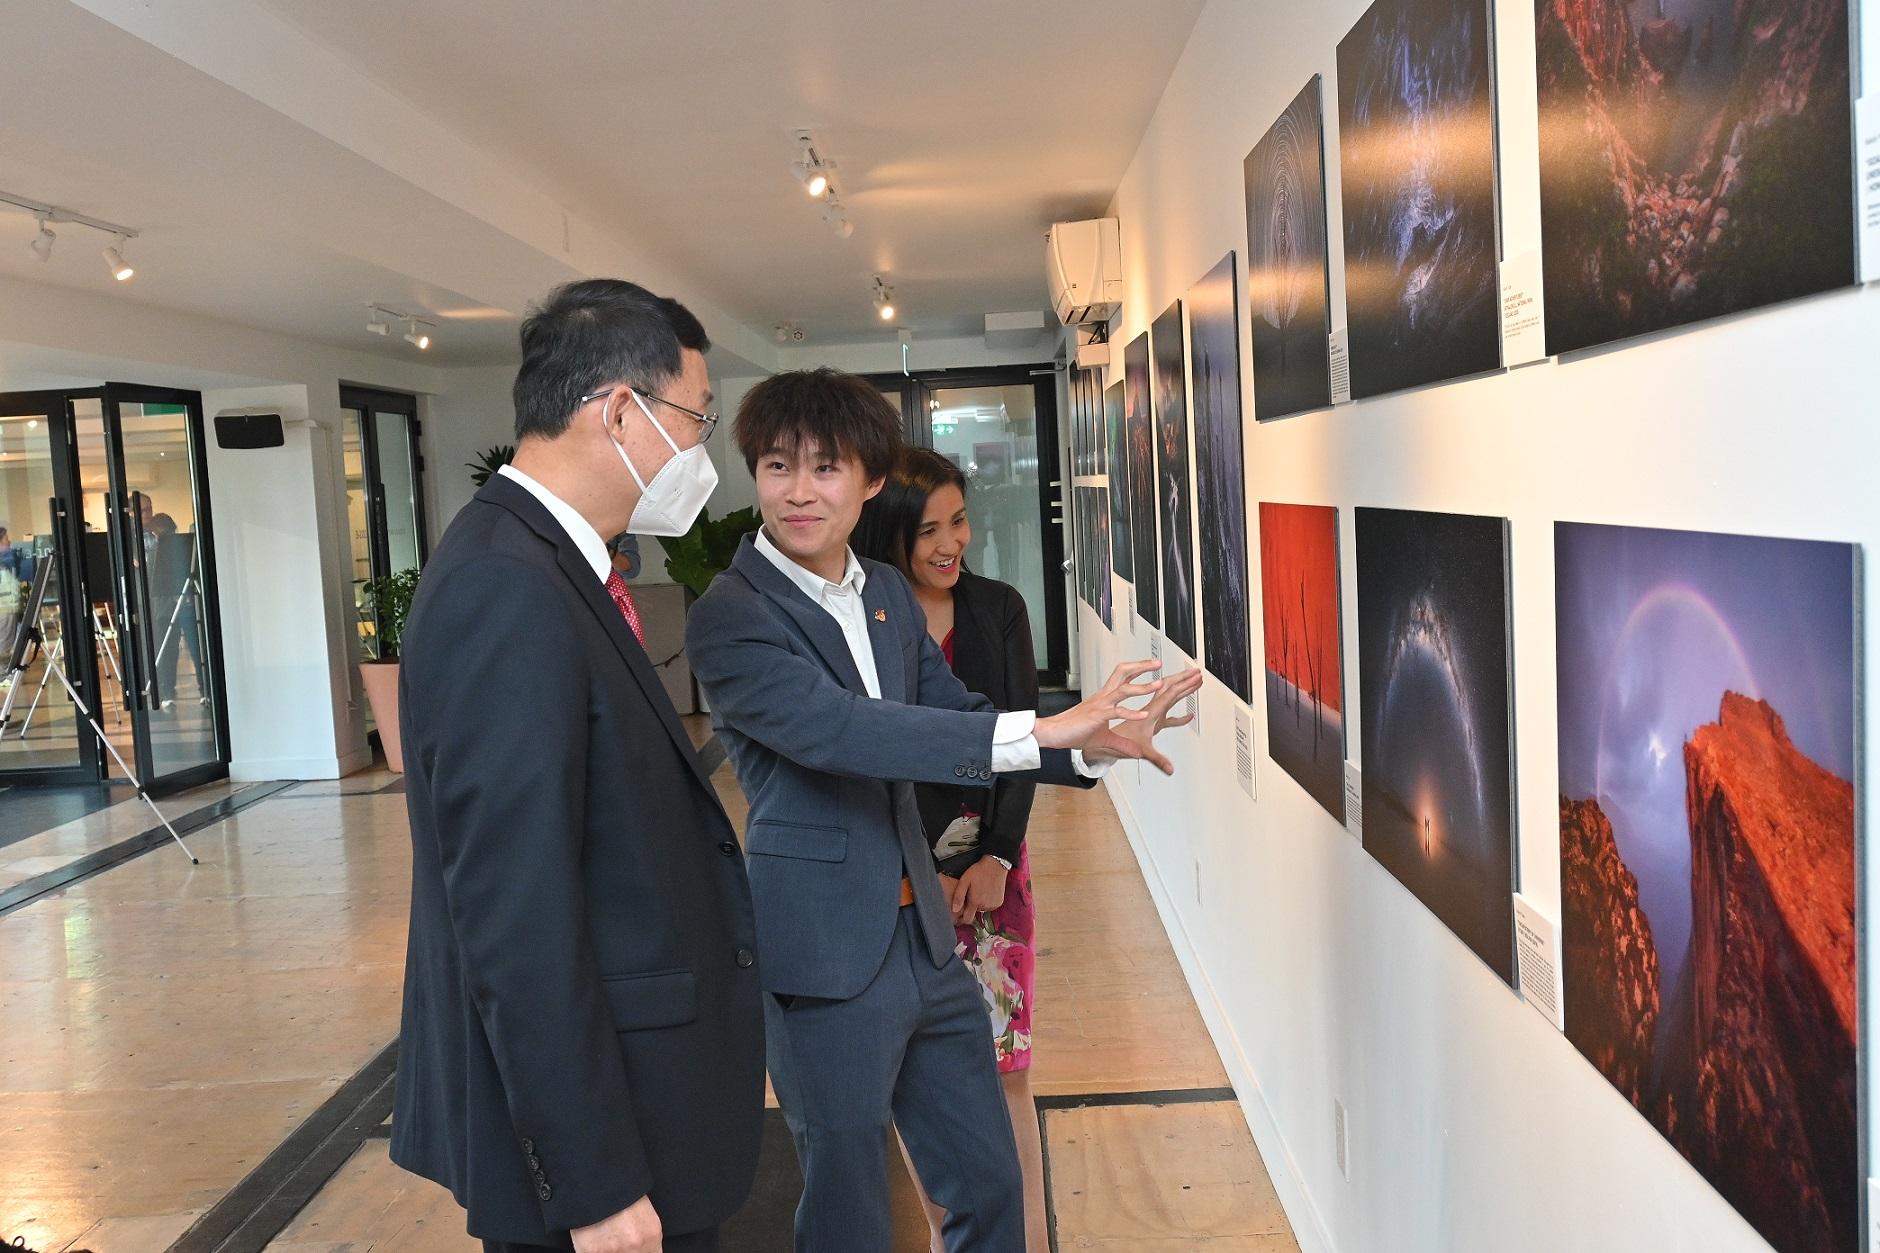 The Director of the Hong Kong Economic and Trade Office (Toronto), Ms Emily Mo (first right) and the Consul General of the People's Republic of China in Toronto, Mr Han Tao (first left), listen to the briefing by Hong Kong photographer Kelvin Yuen (centre) during a tour to the photos displayed at the "A Landscape Journey" photography exhibition yesterday (October 4, Toronto time).